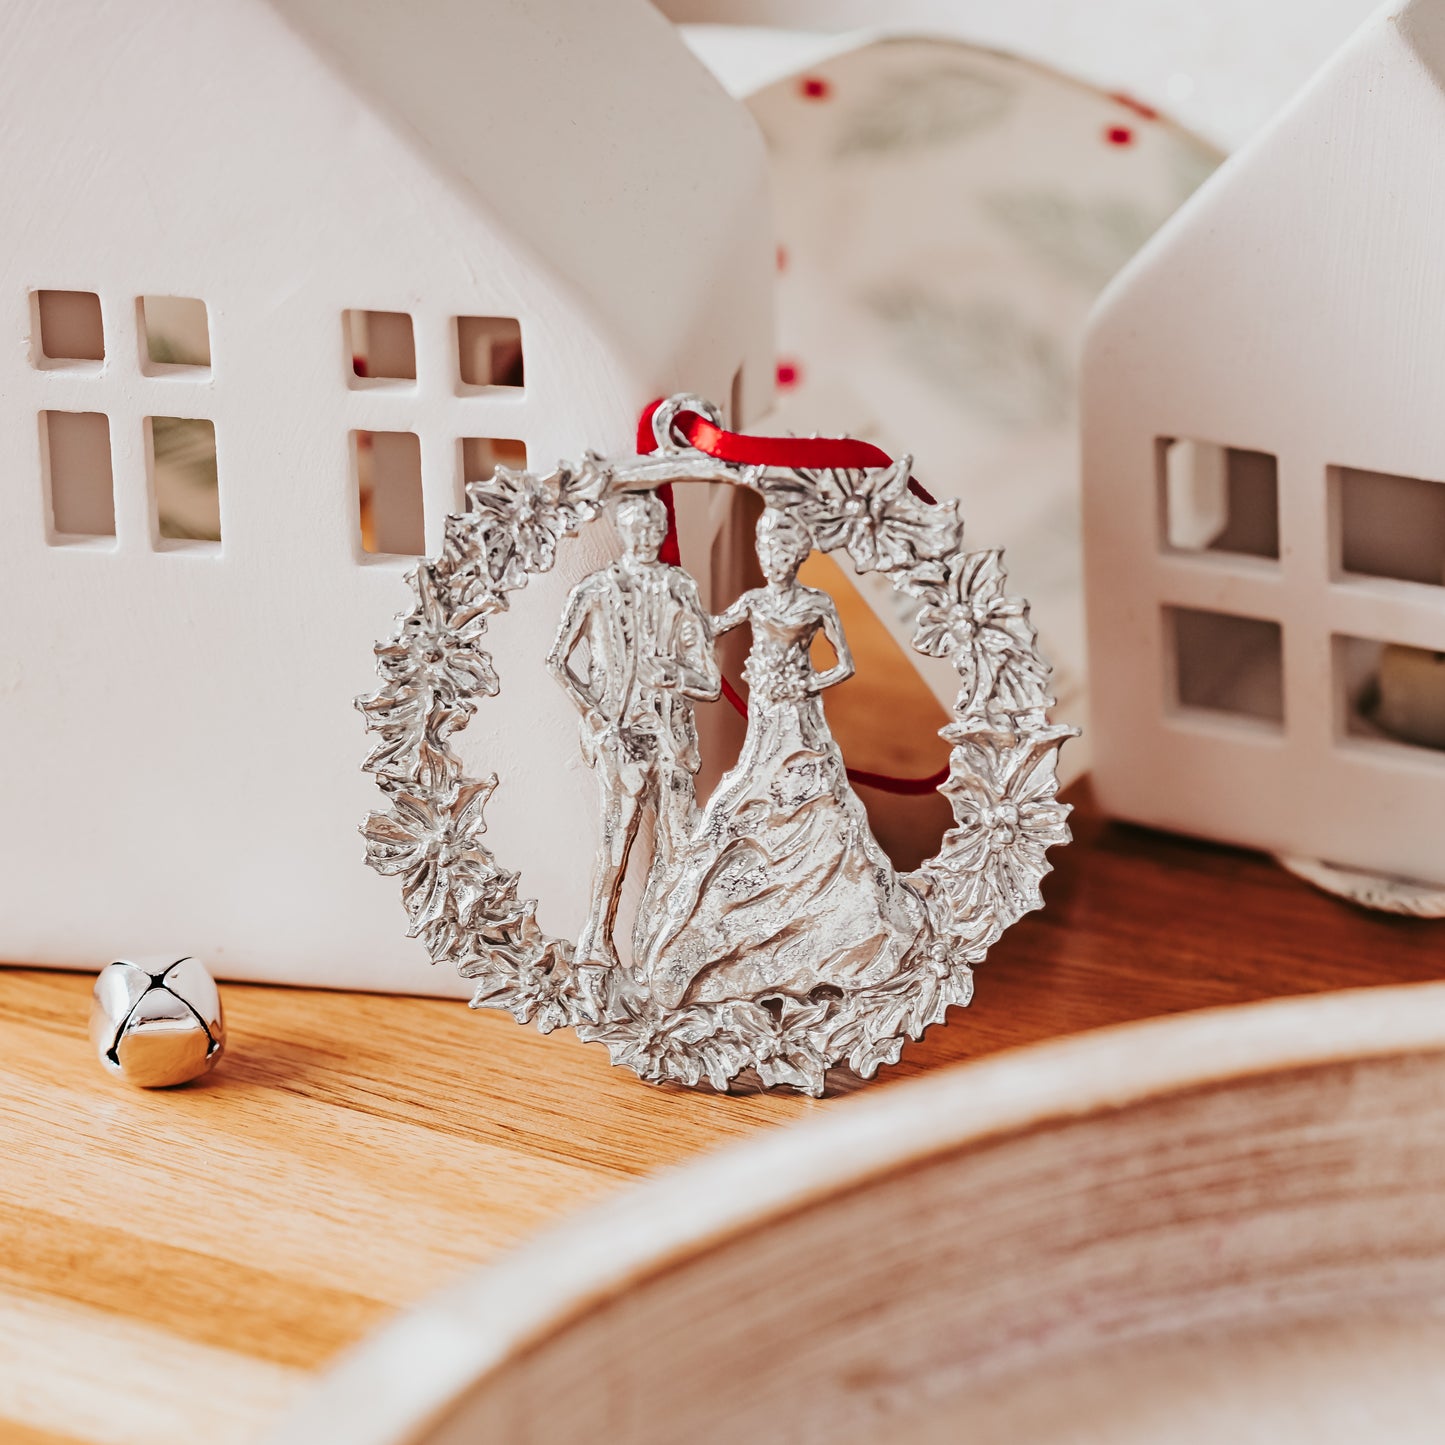 First Christmas Gifts - First Home - First Christmas Together - Bride and Groom - Christmas Ornaments